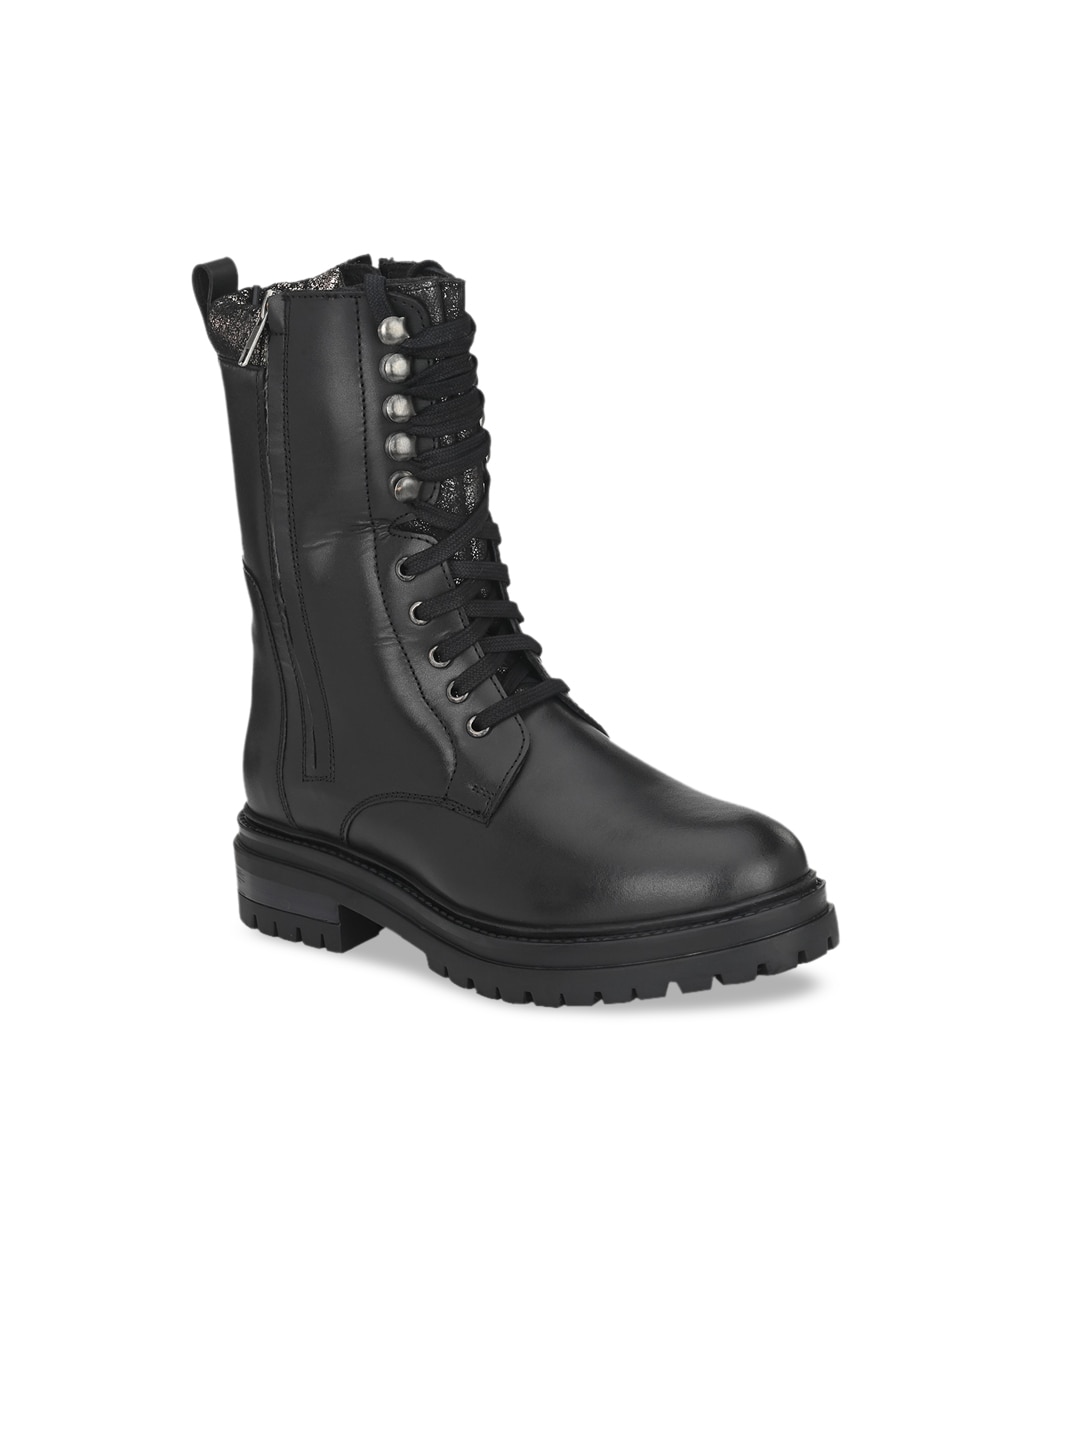 Delize Women Black Flat Boots Price in India